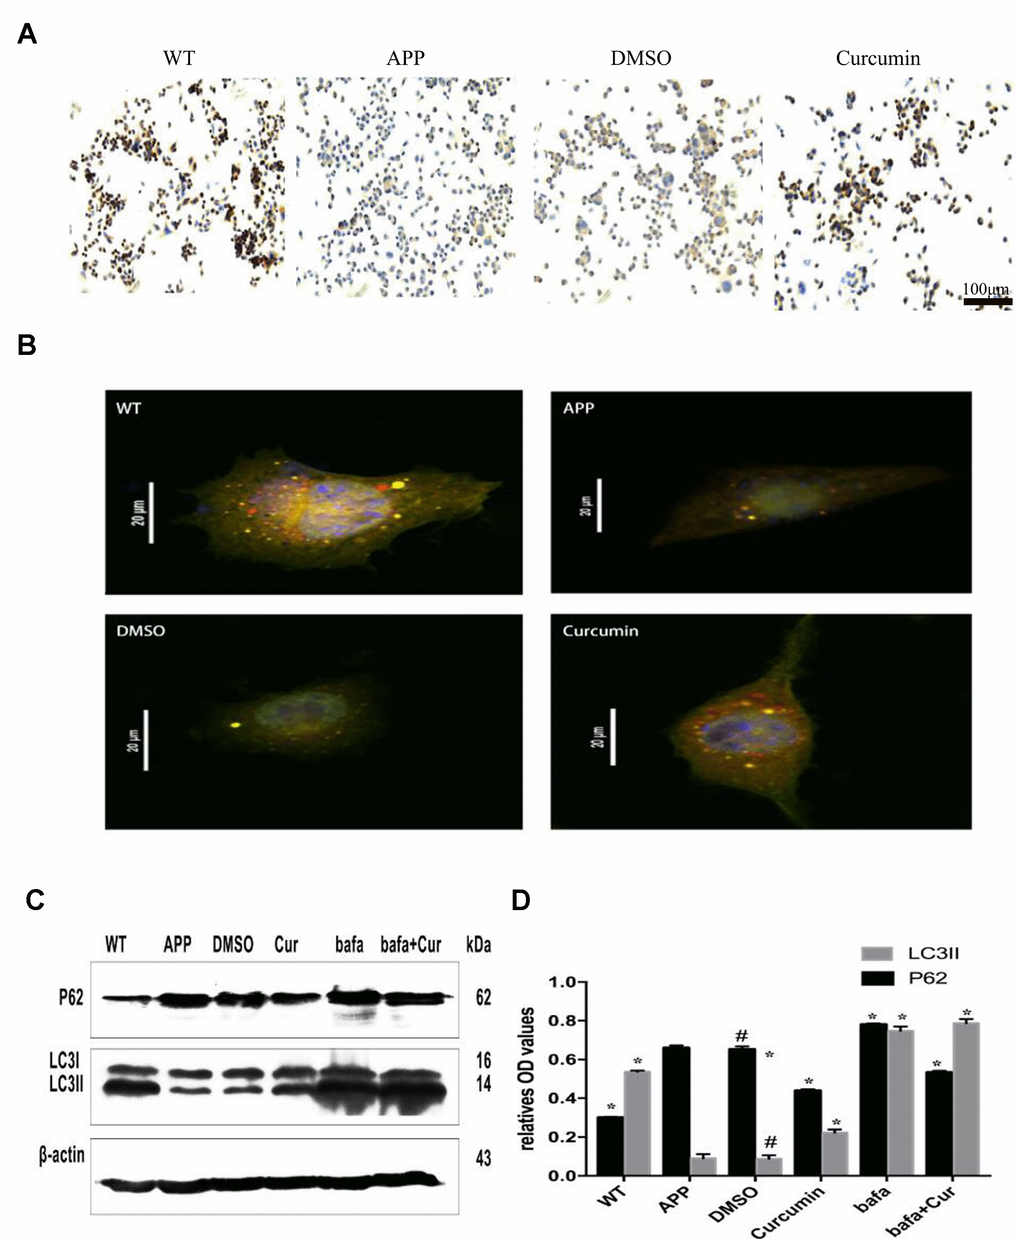 Curcumin enhanced autophagic flux and autophagosome-lysosome binding in N2a/APP695swe cells. (A) LAMP2 immunocytochemistry was used to detect the expression of lysosome in each group. Bar = 100 μm. (B) Fluorescent microscopy analysis of cells transiently overexpressing mRFP-GFP-LC3.Bar=20 μm. (C–D) Western blot analysis of P62 and LC3II in each group; Representative blot (A) and summary graph of densitometric analysis (D); The data represent as mean ± SEM of a typical series of 3 experiments (# P